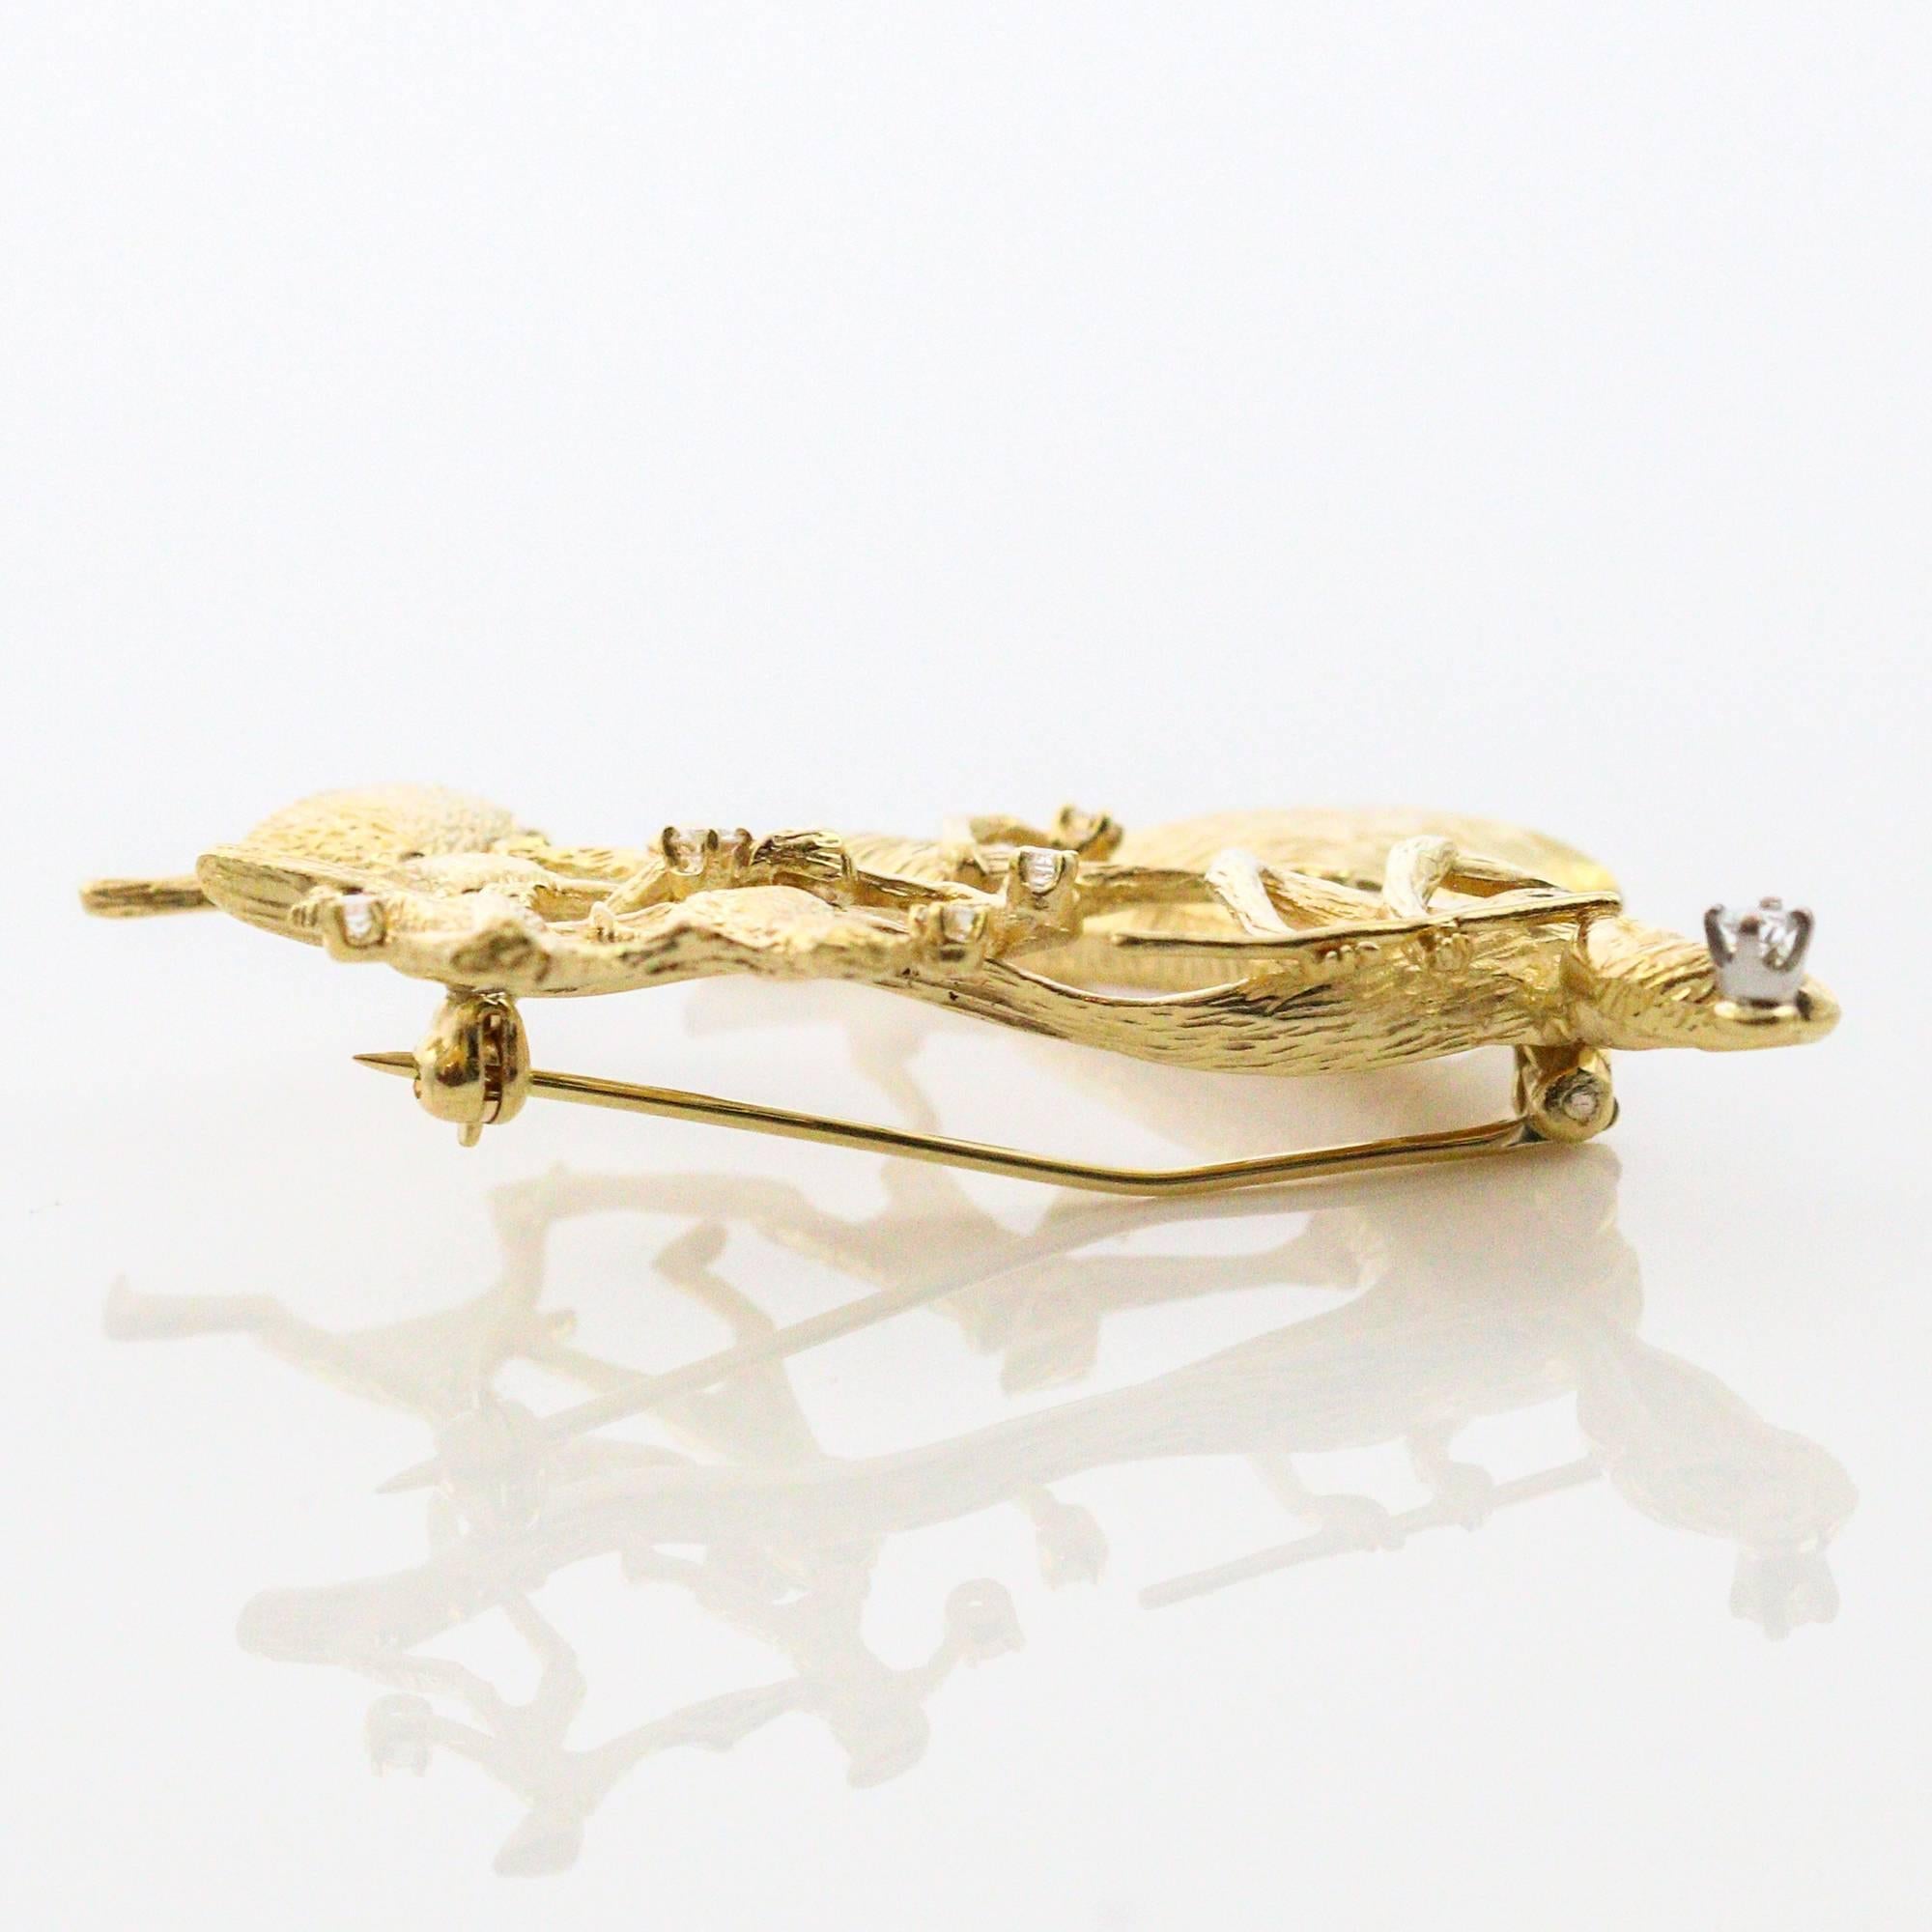 This whimsical Modernist brooch, made in 18k yellow gold tells the Germanic story of the Pied Piper. The children are chasing the flute player eagerly, each one of them holding a small round brilliant cut diamond. The total weight of all 6 round